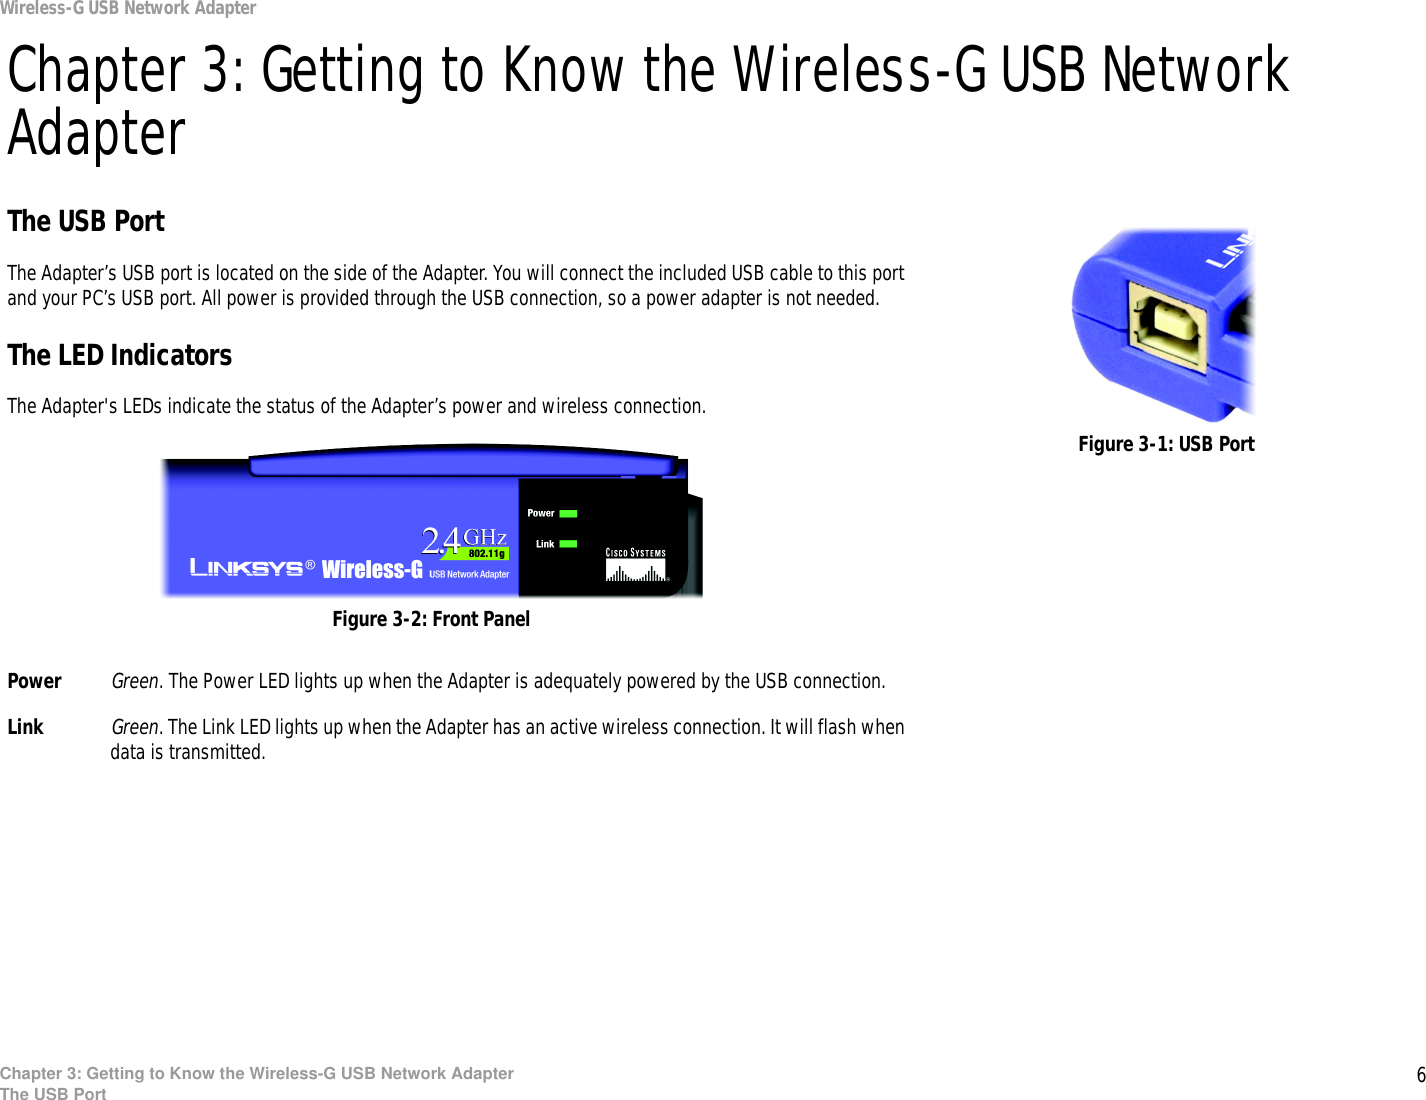 6Chapter 3: Getting to Know the Wireless-G USB Network AdapterThe USB PortWireless-G USB Network AdapterChapter 3: Getting to Know the Wireless-G USB Network AdapterThe USB PortThe Adapter’s USB port is located on the side of the Adapter. You will connect the included USB cable to this port and your PC’s USB port. All power is provided through the USB connection, so a power adapter is not needed.The LED IndicatorsThe Adapter&apos;s LEDs indicate the status of the Adapter’s power and wireless connection.Power Green. The Power LED lights up when the Adapter is adequately powered by the USB connection.Link Green. The Link LED lights up when the Adapter has an active wireless connection. It will flash when data is transmitted.Figure 3-1: USB PortFigure 3-2: Front Panel